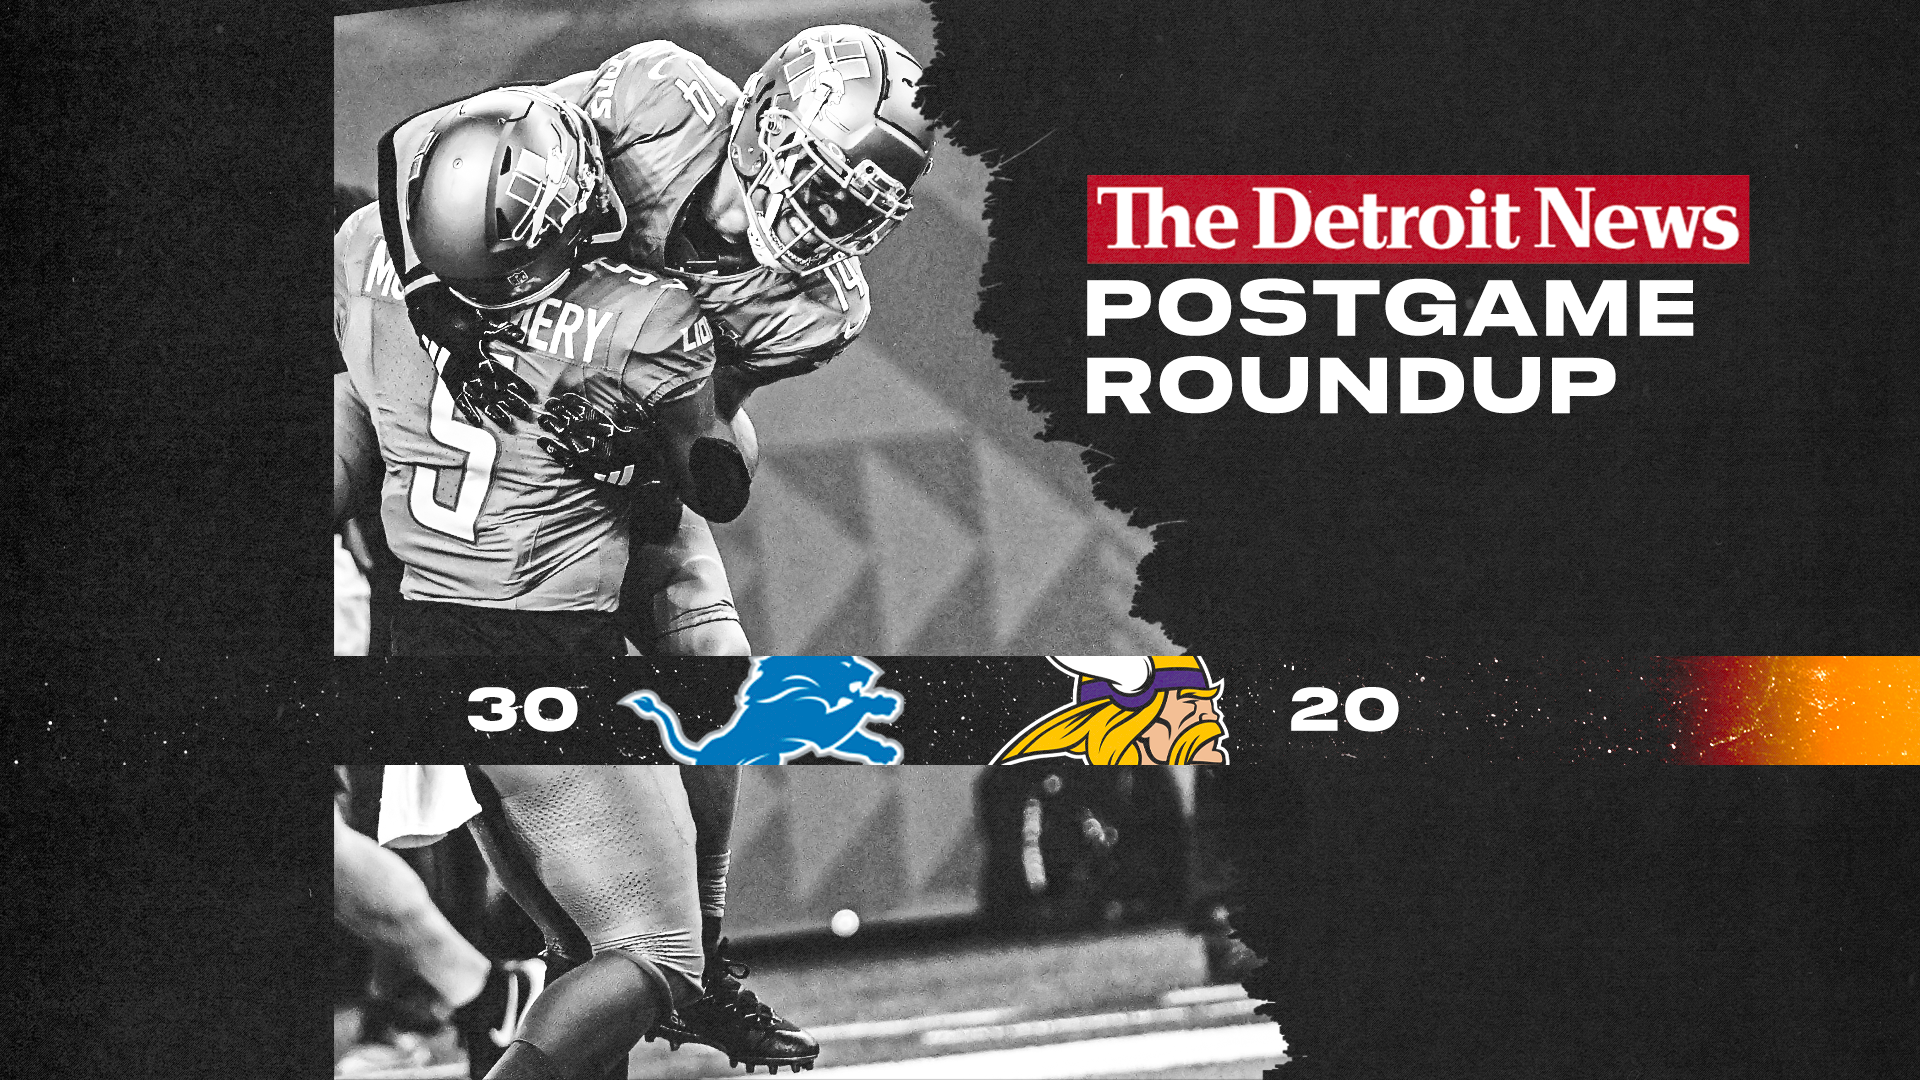 Here's a roundup of all of The Detroit News' coverage from the Detroit Lions' 30-20 win over the Minnesota Vikings at Ford Field on Sunday.